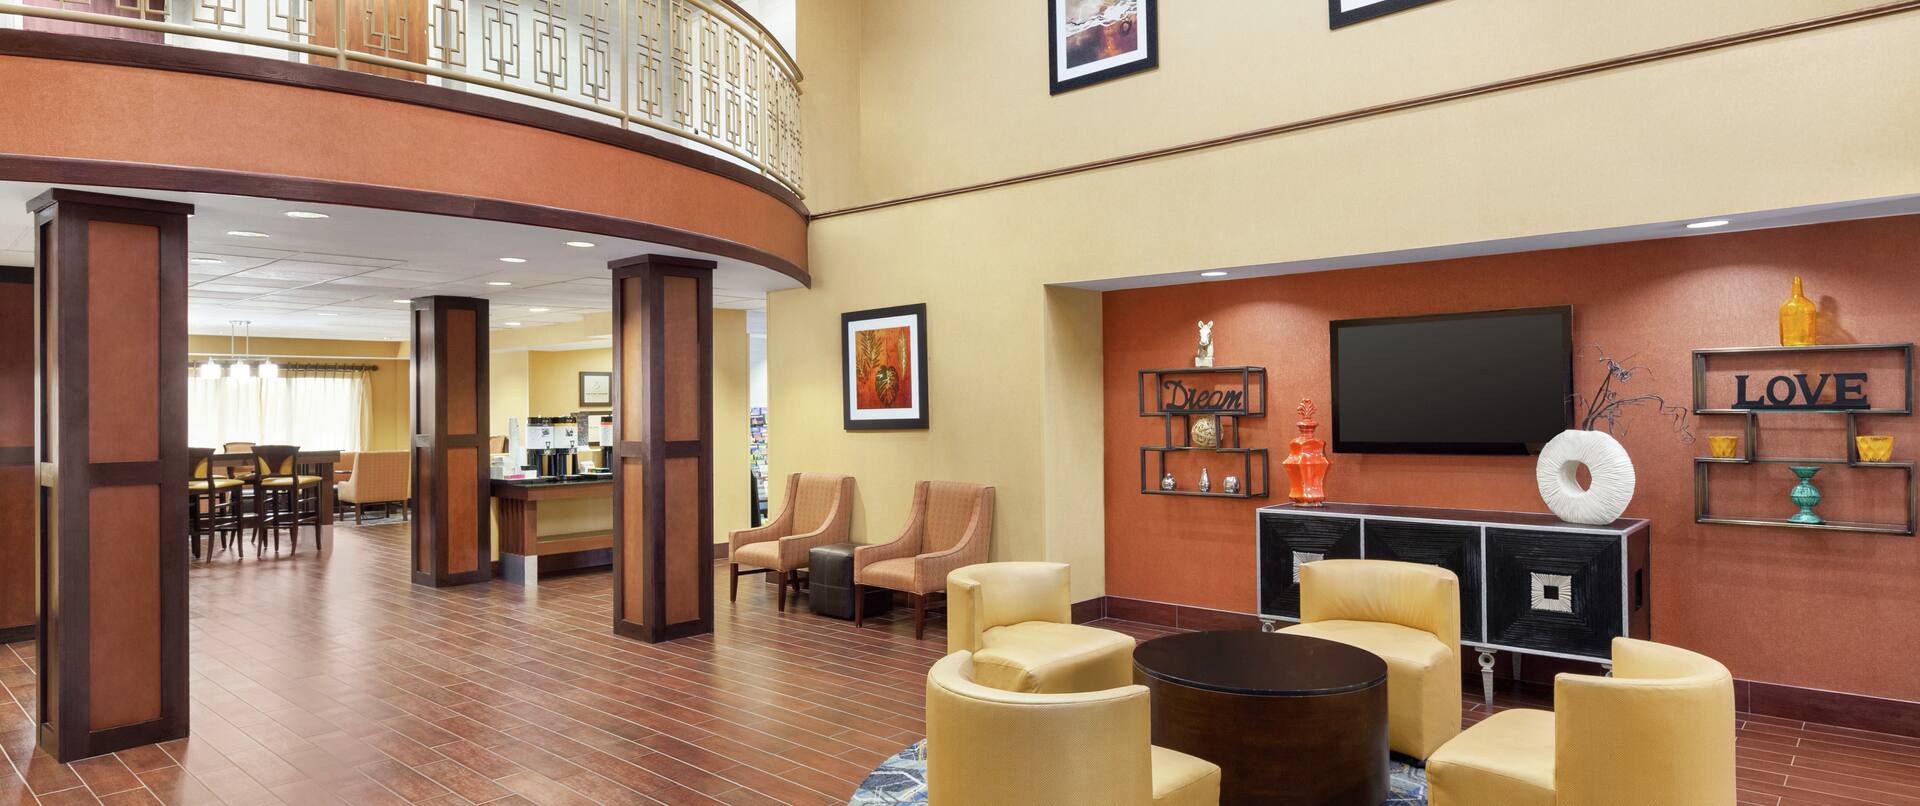 Lobby area with comfortable chairs